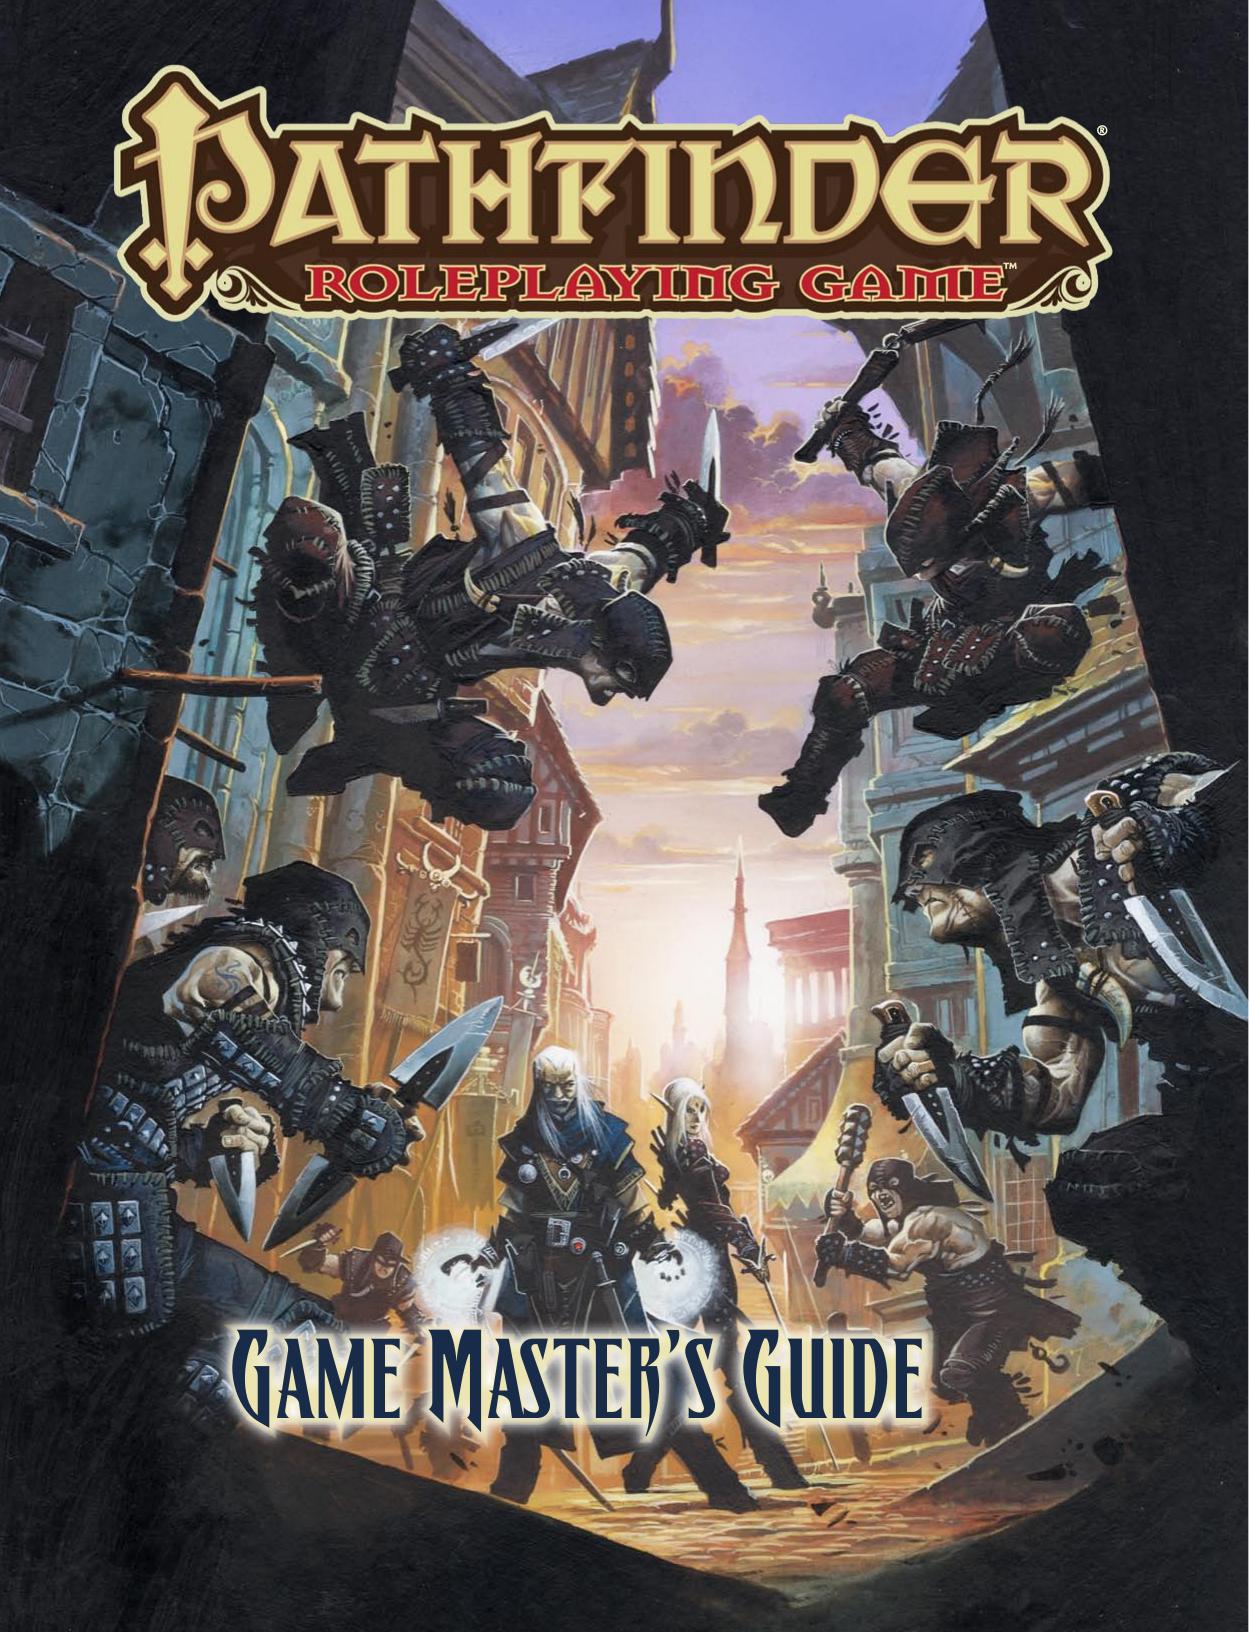 Game Master's Guide